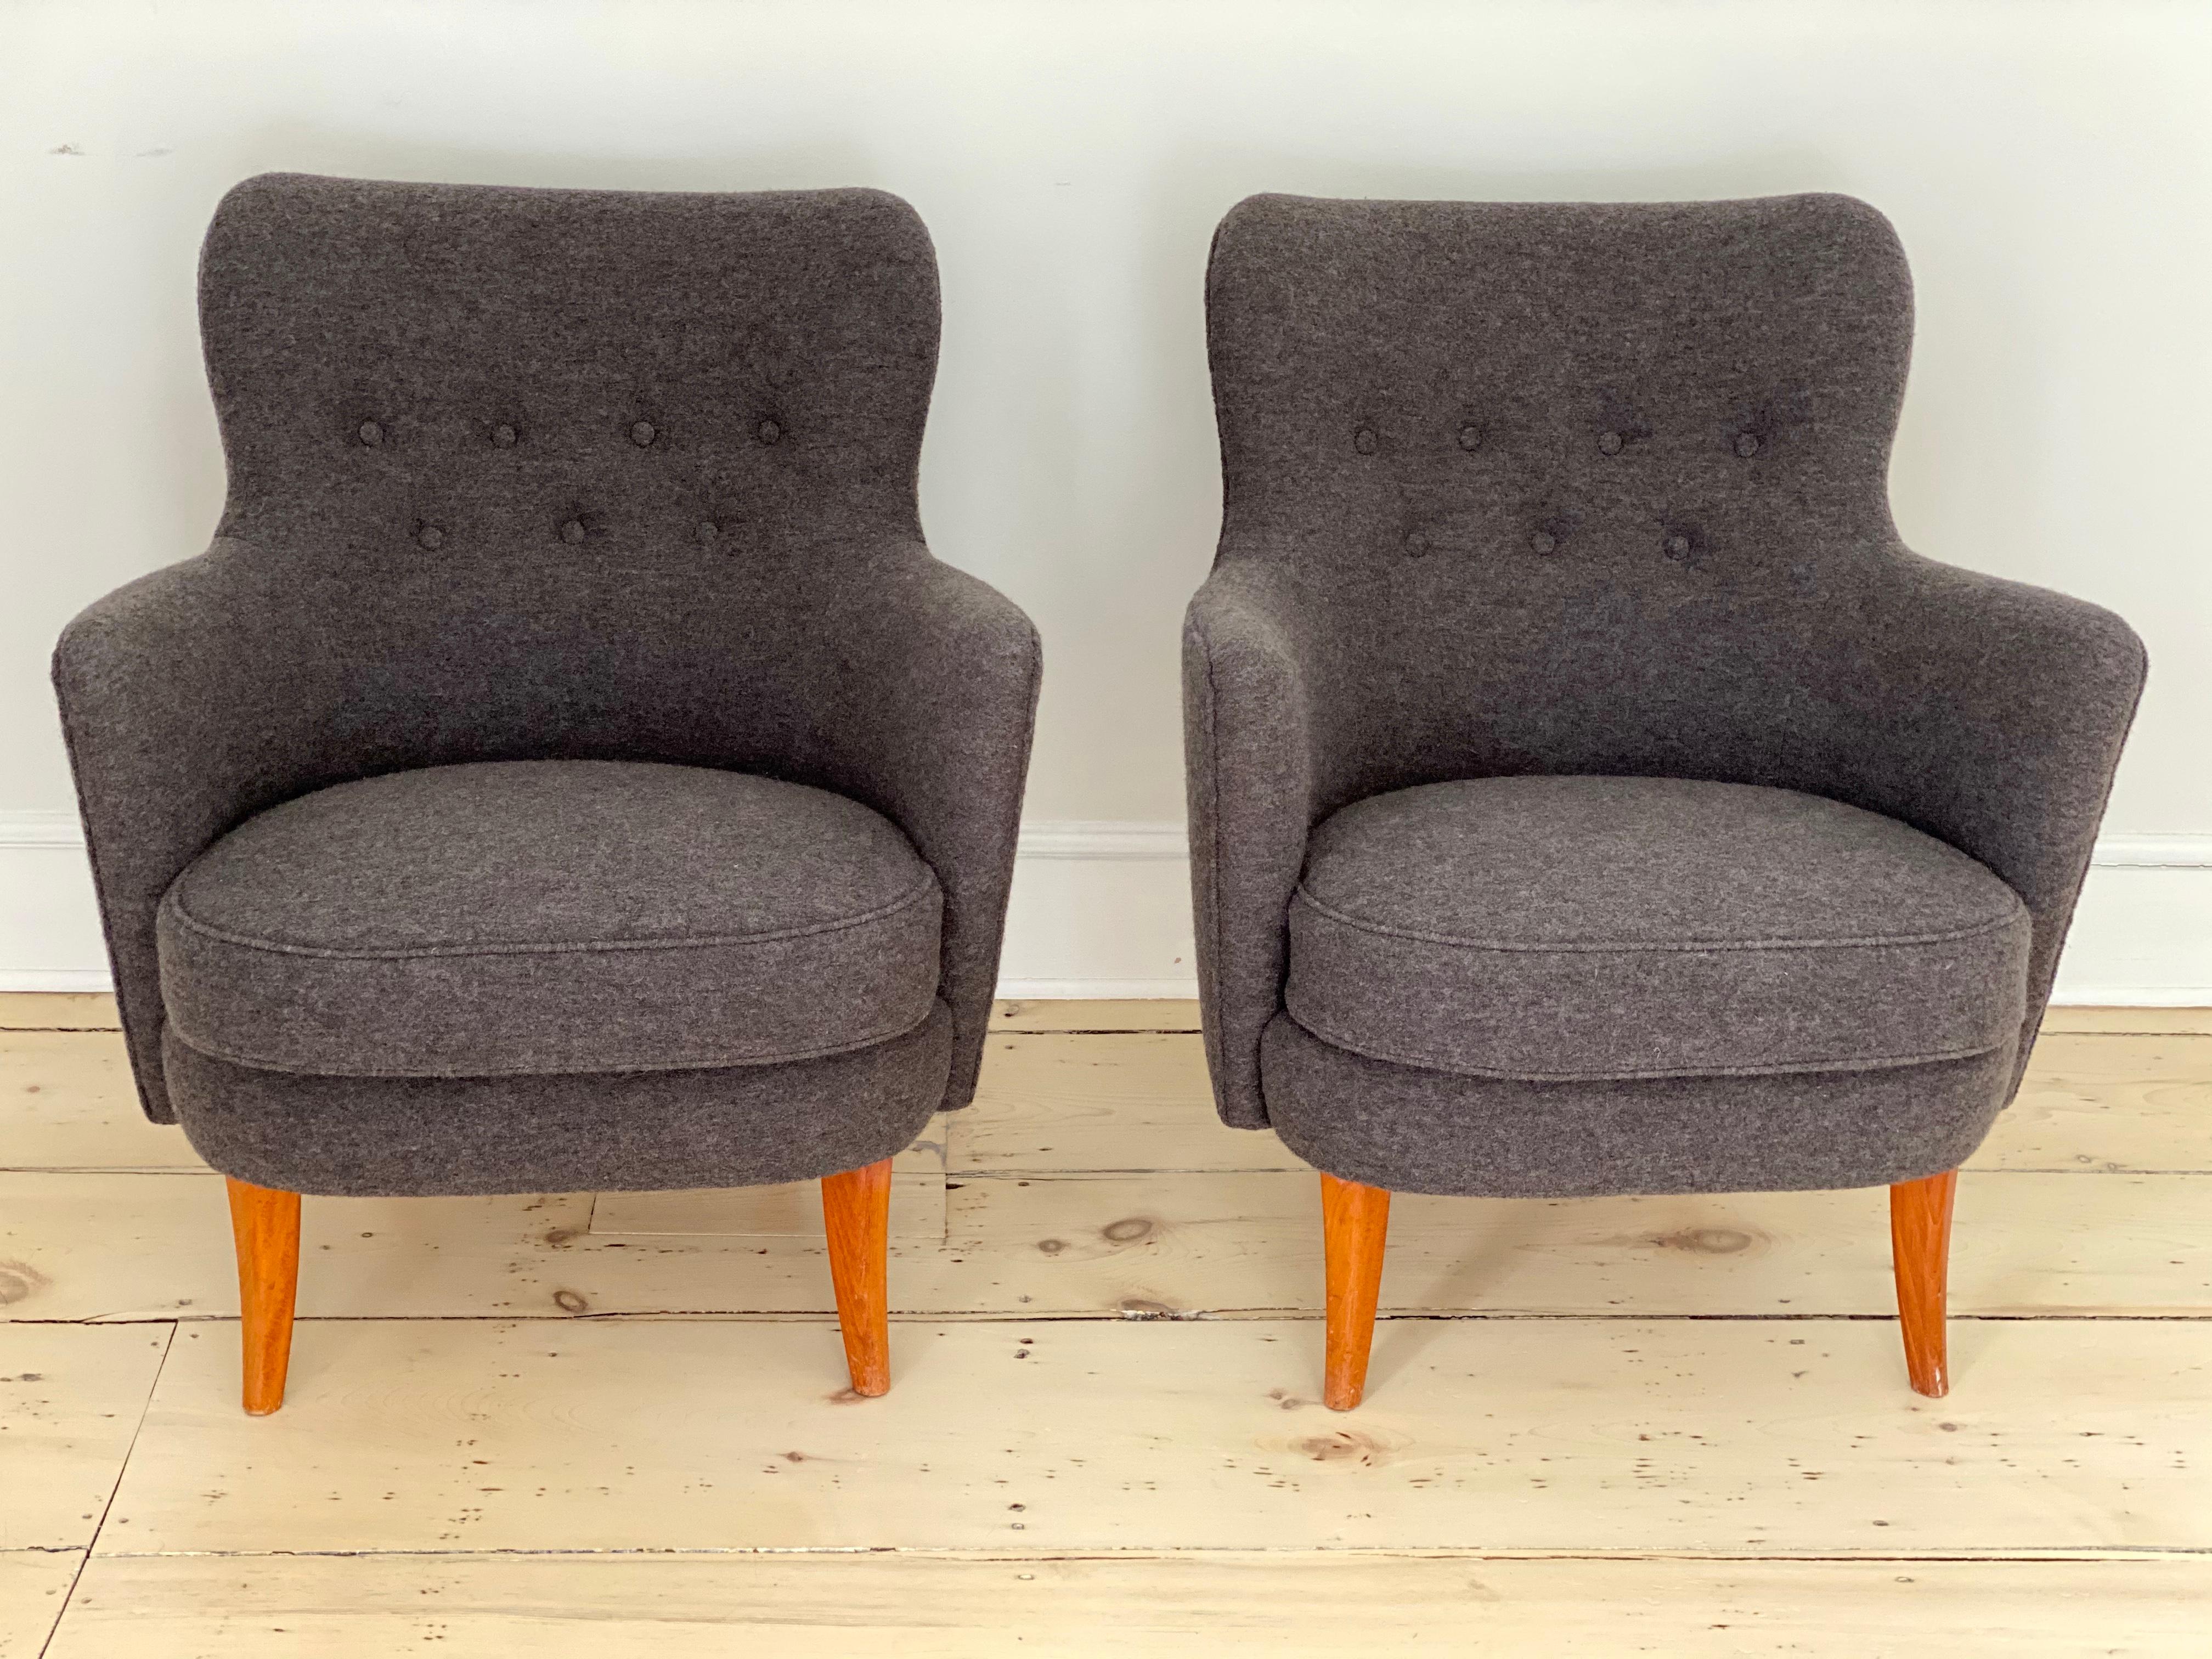 Midcentury easy chairs attributed to Carl Malmsten
Newly reupholstered in brown/grey wool with beech legs

Measures: Height 32